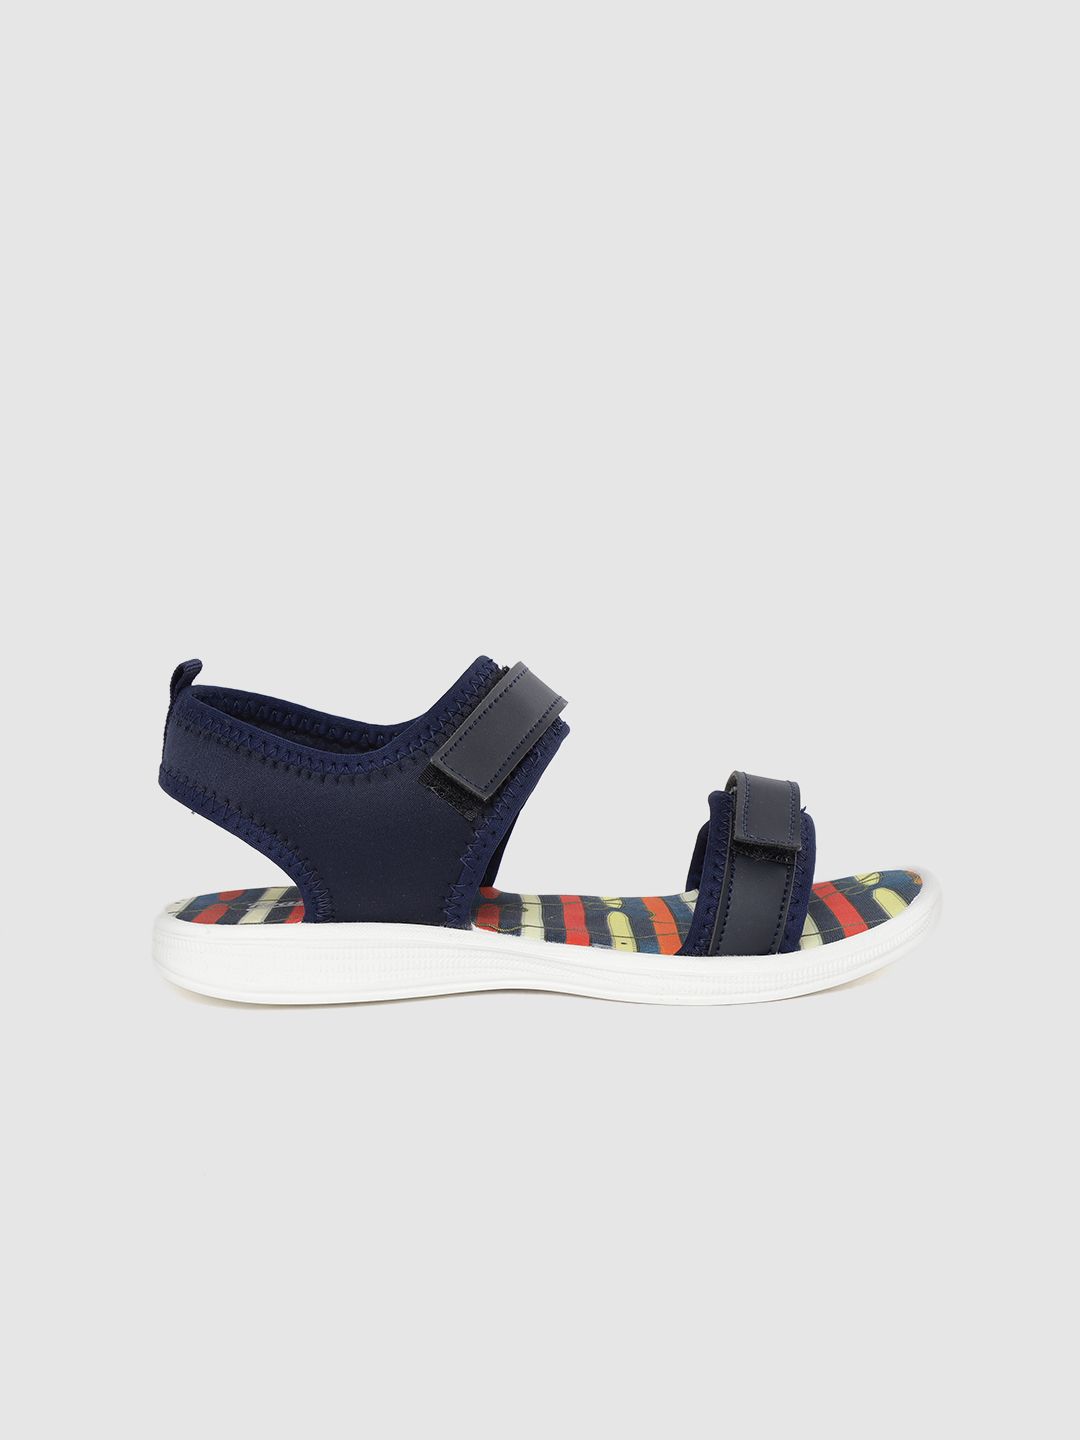 The Roadster Lifestyle Co Women Navy Blue & Black Sports Sandals Price in India